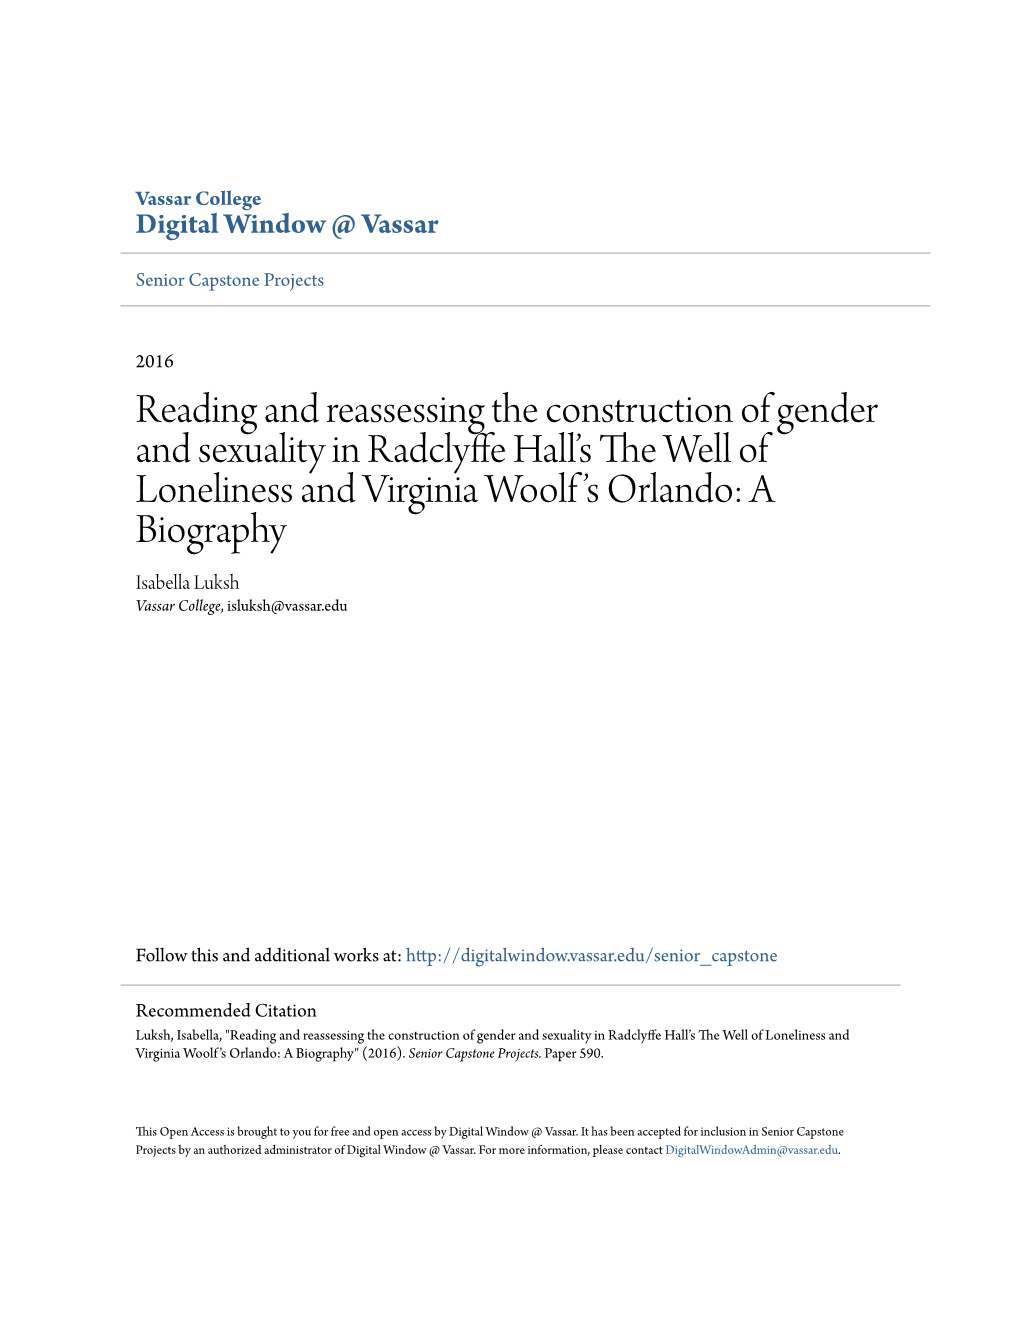 Reading and Reassessing the Construction of Gender and Sexuality